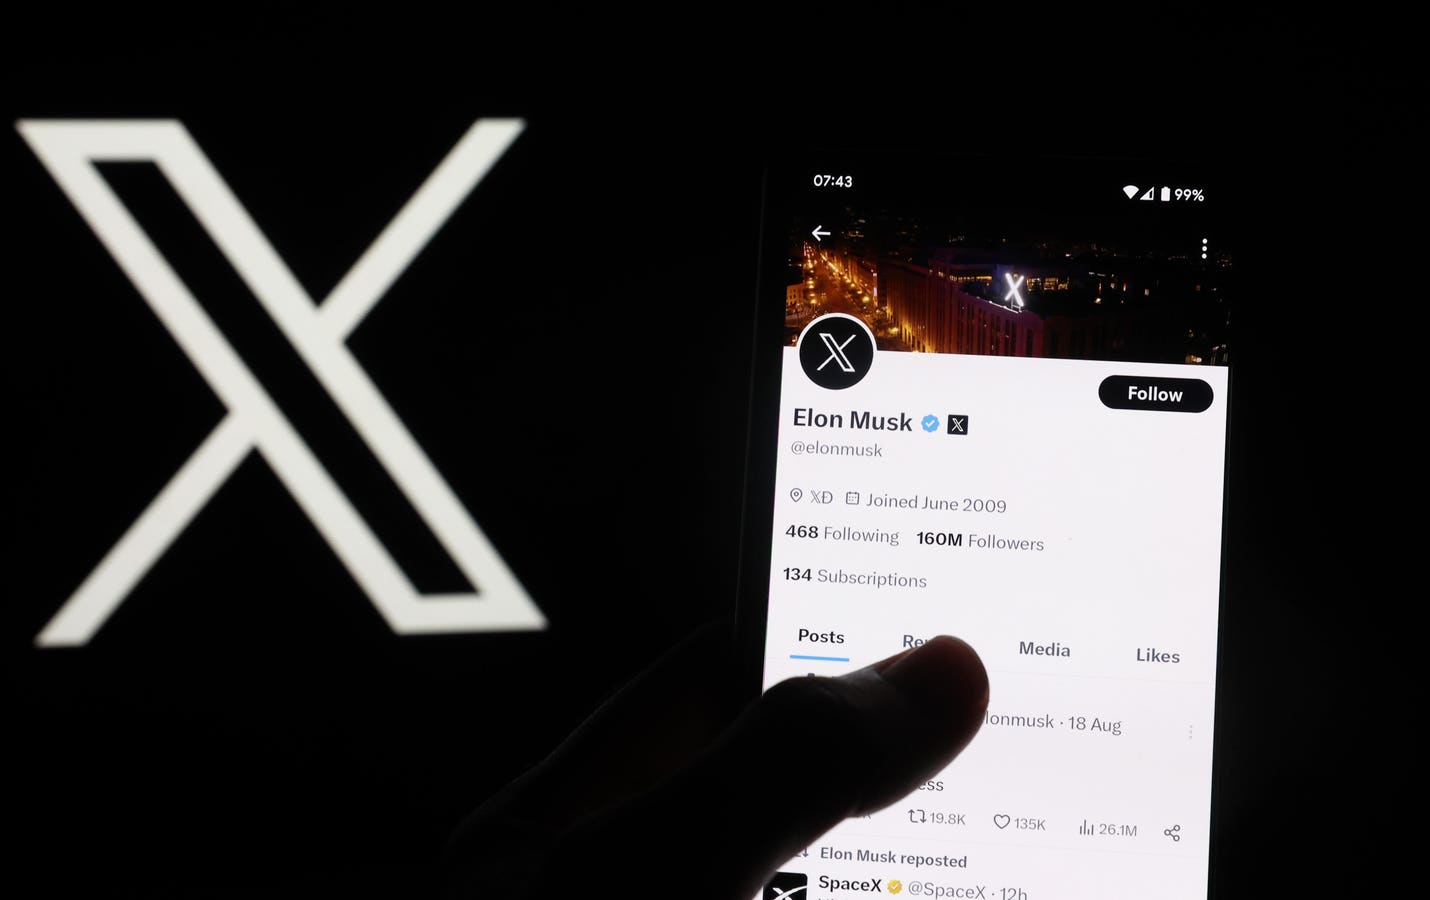 x-introduces-audio-and-video-calls-for-android-users